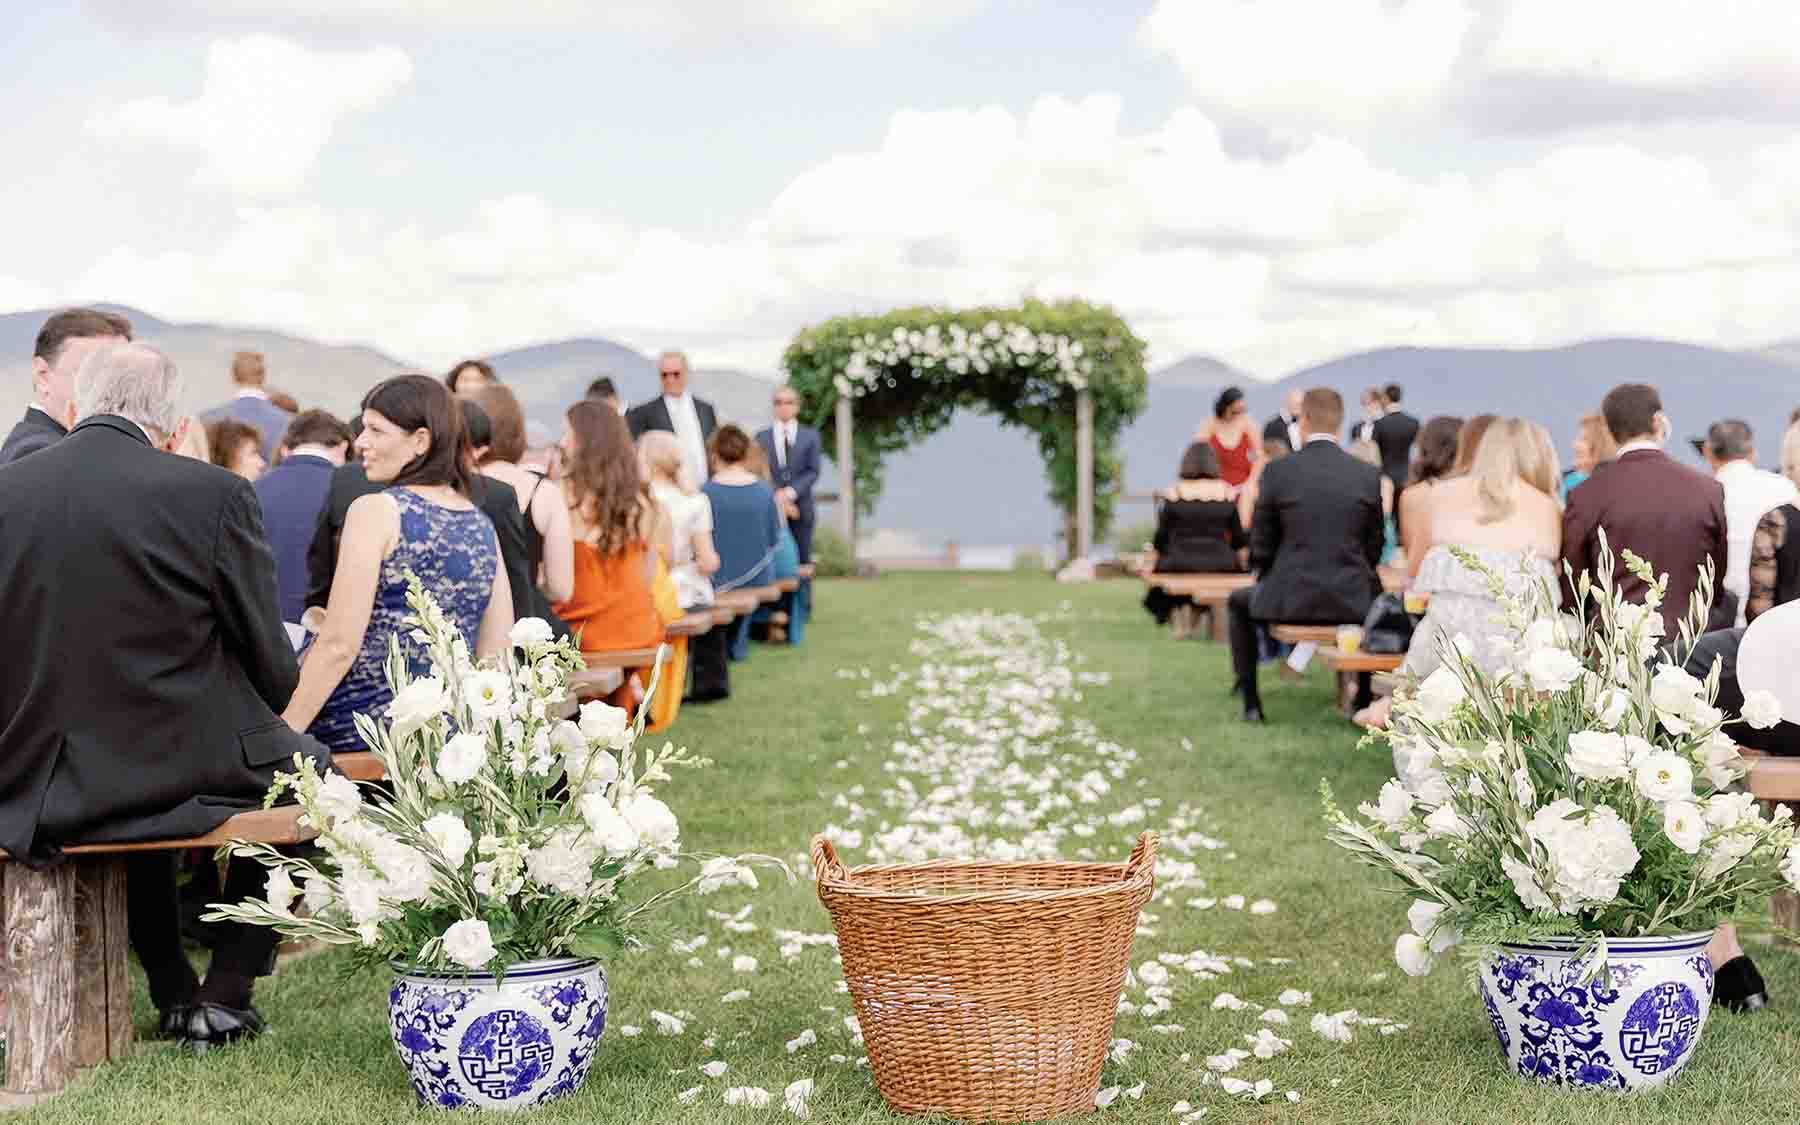 outdoor wedding ceremony with white flower petals strewn along aisle and guests sitting on benches.